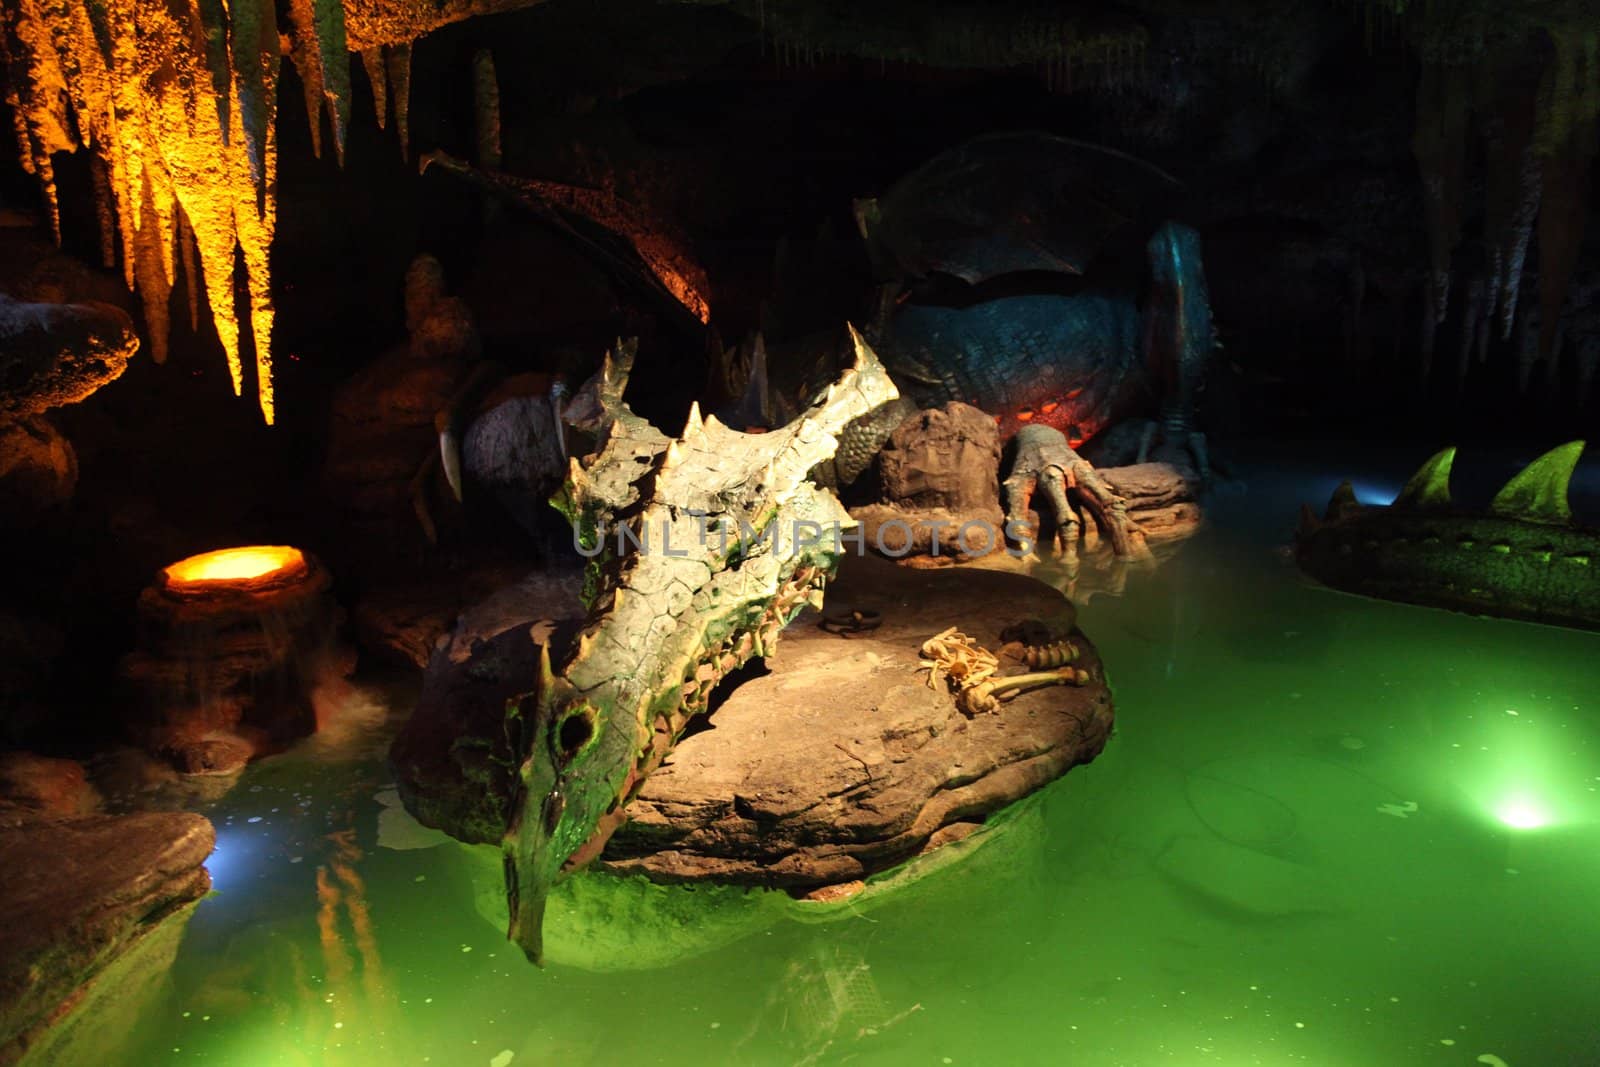 A Dragon asleep in a cave with green water